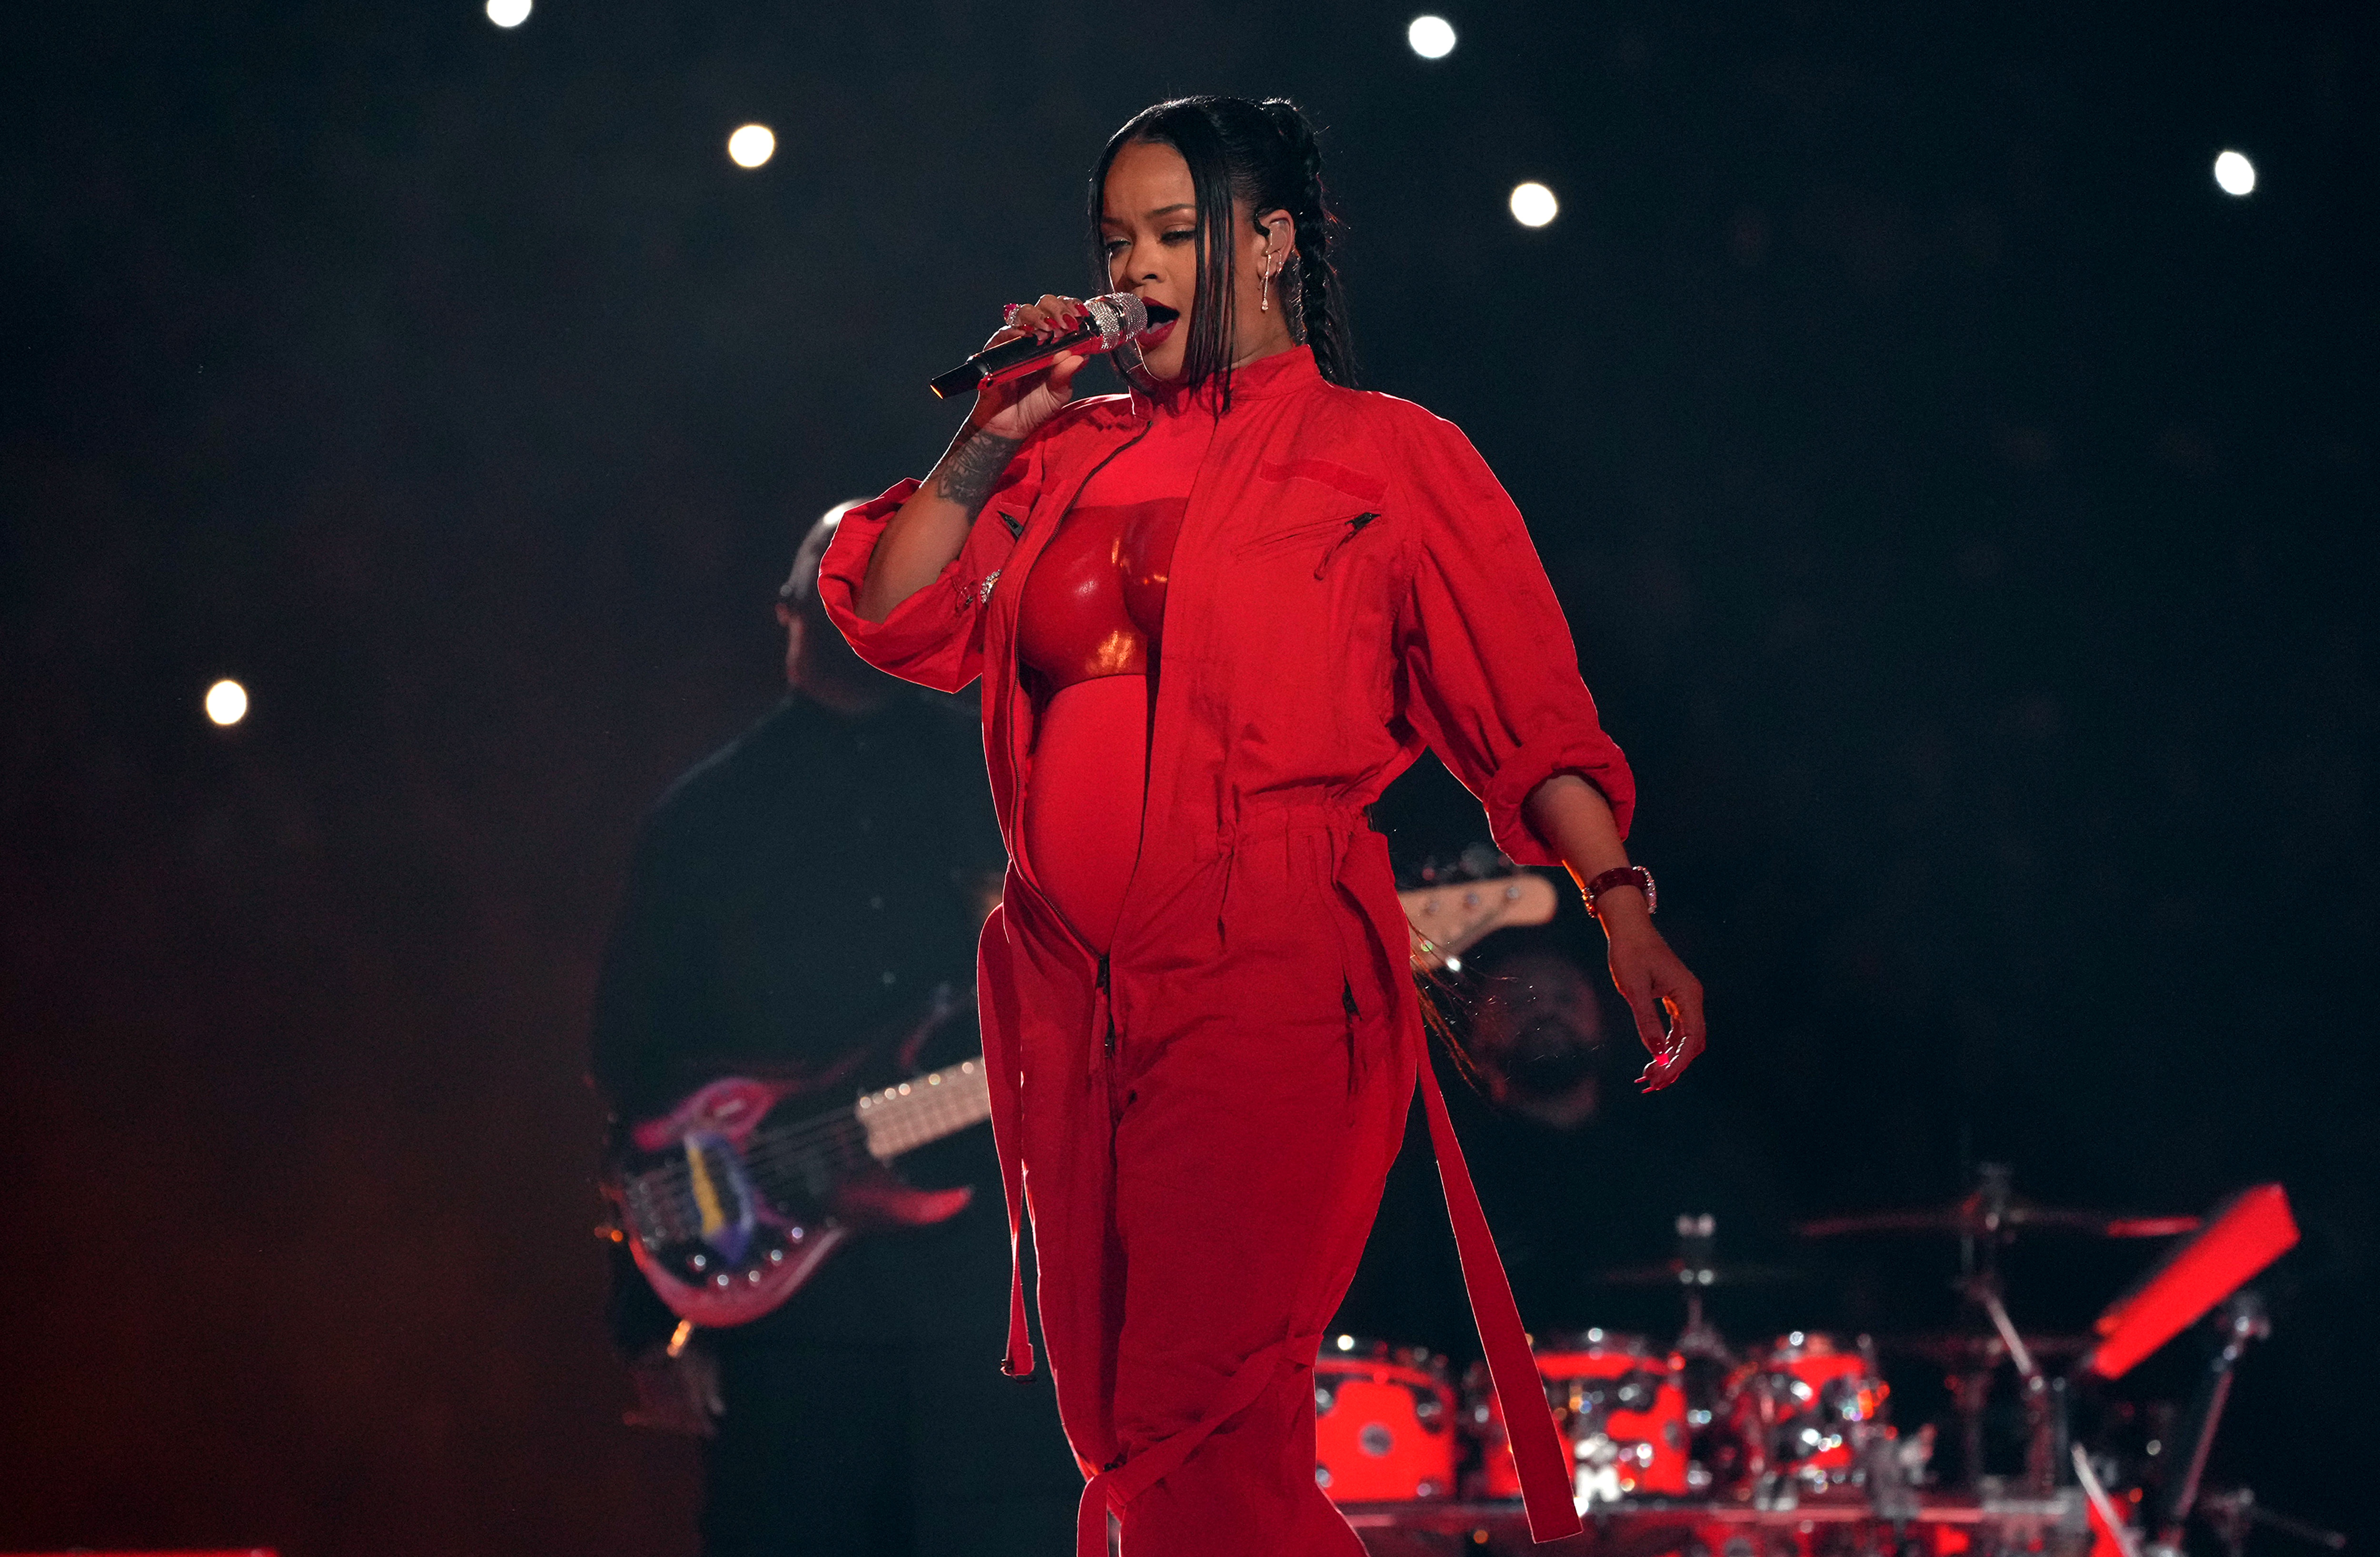 GLENDALE, ARIZONA - FEBRUARY 12: Rihanna performs during Apple Music Super Bowl LVII Halftime Show at State Farm Stadium on February 12, 2023 in Glendale, Arizona. (Photo by Kevin Mazur/Getty Images for Roc Nation)